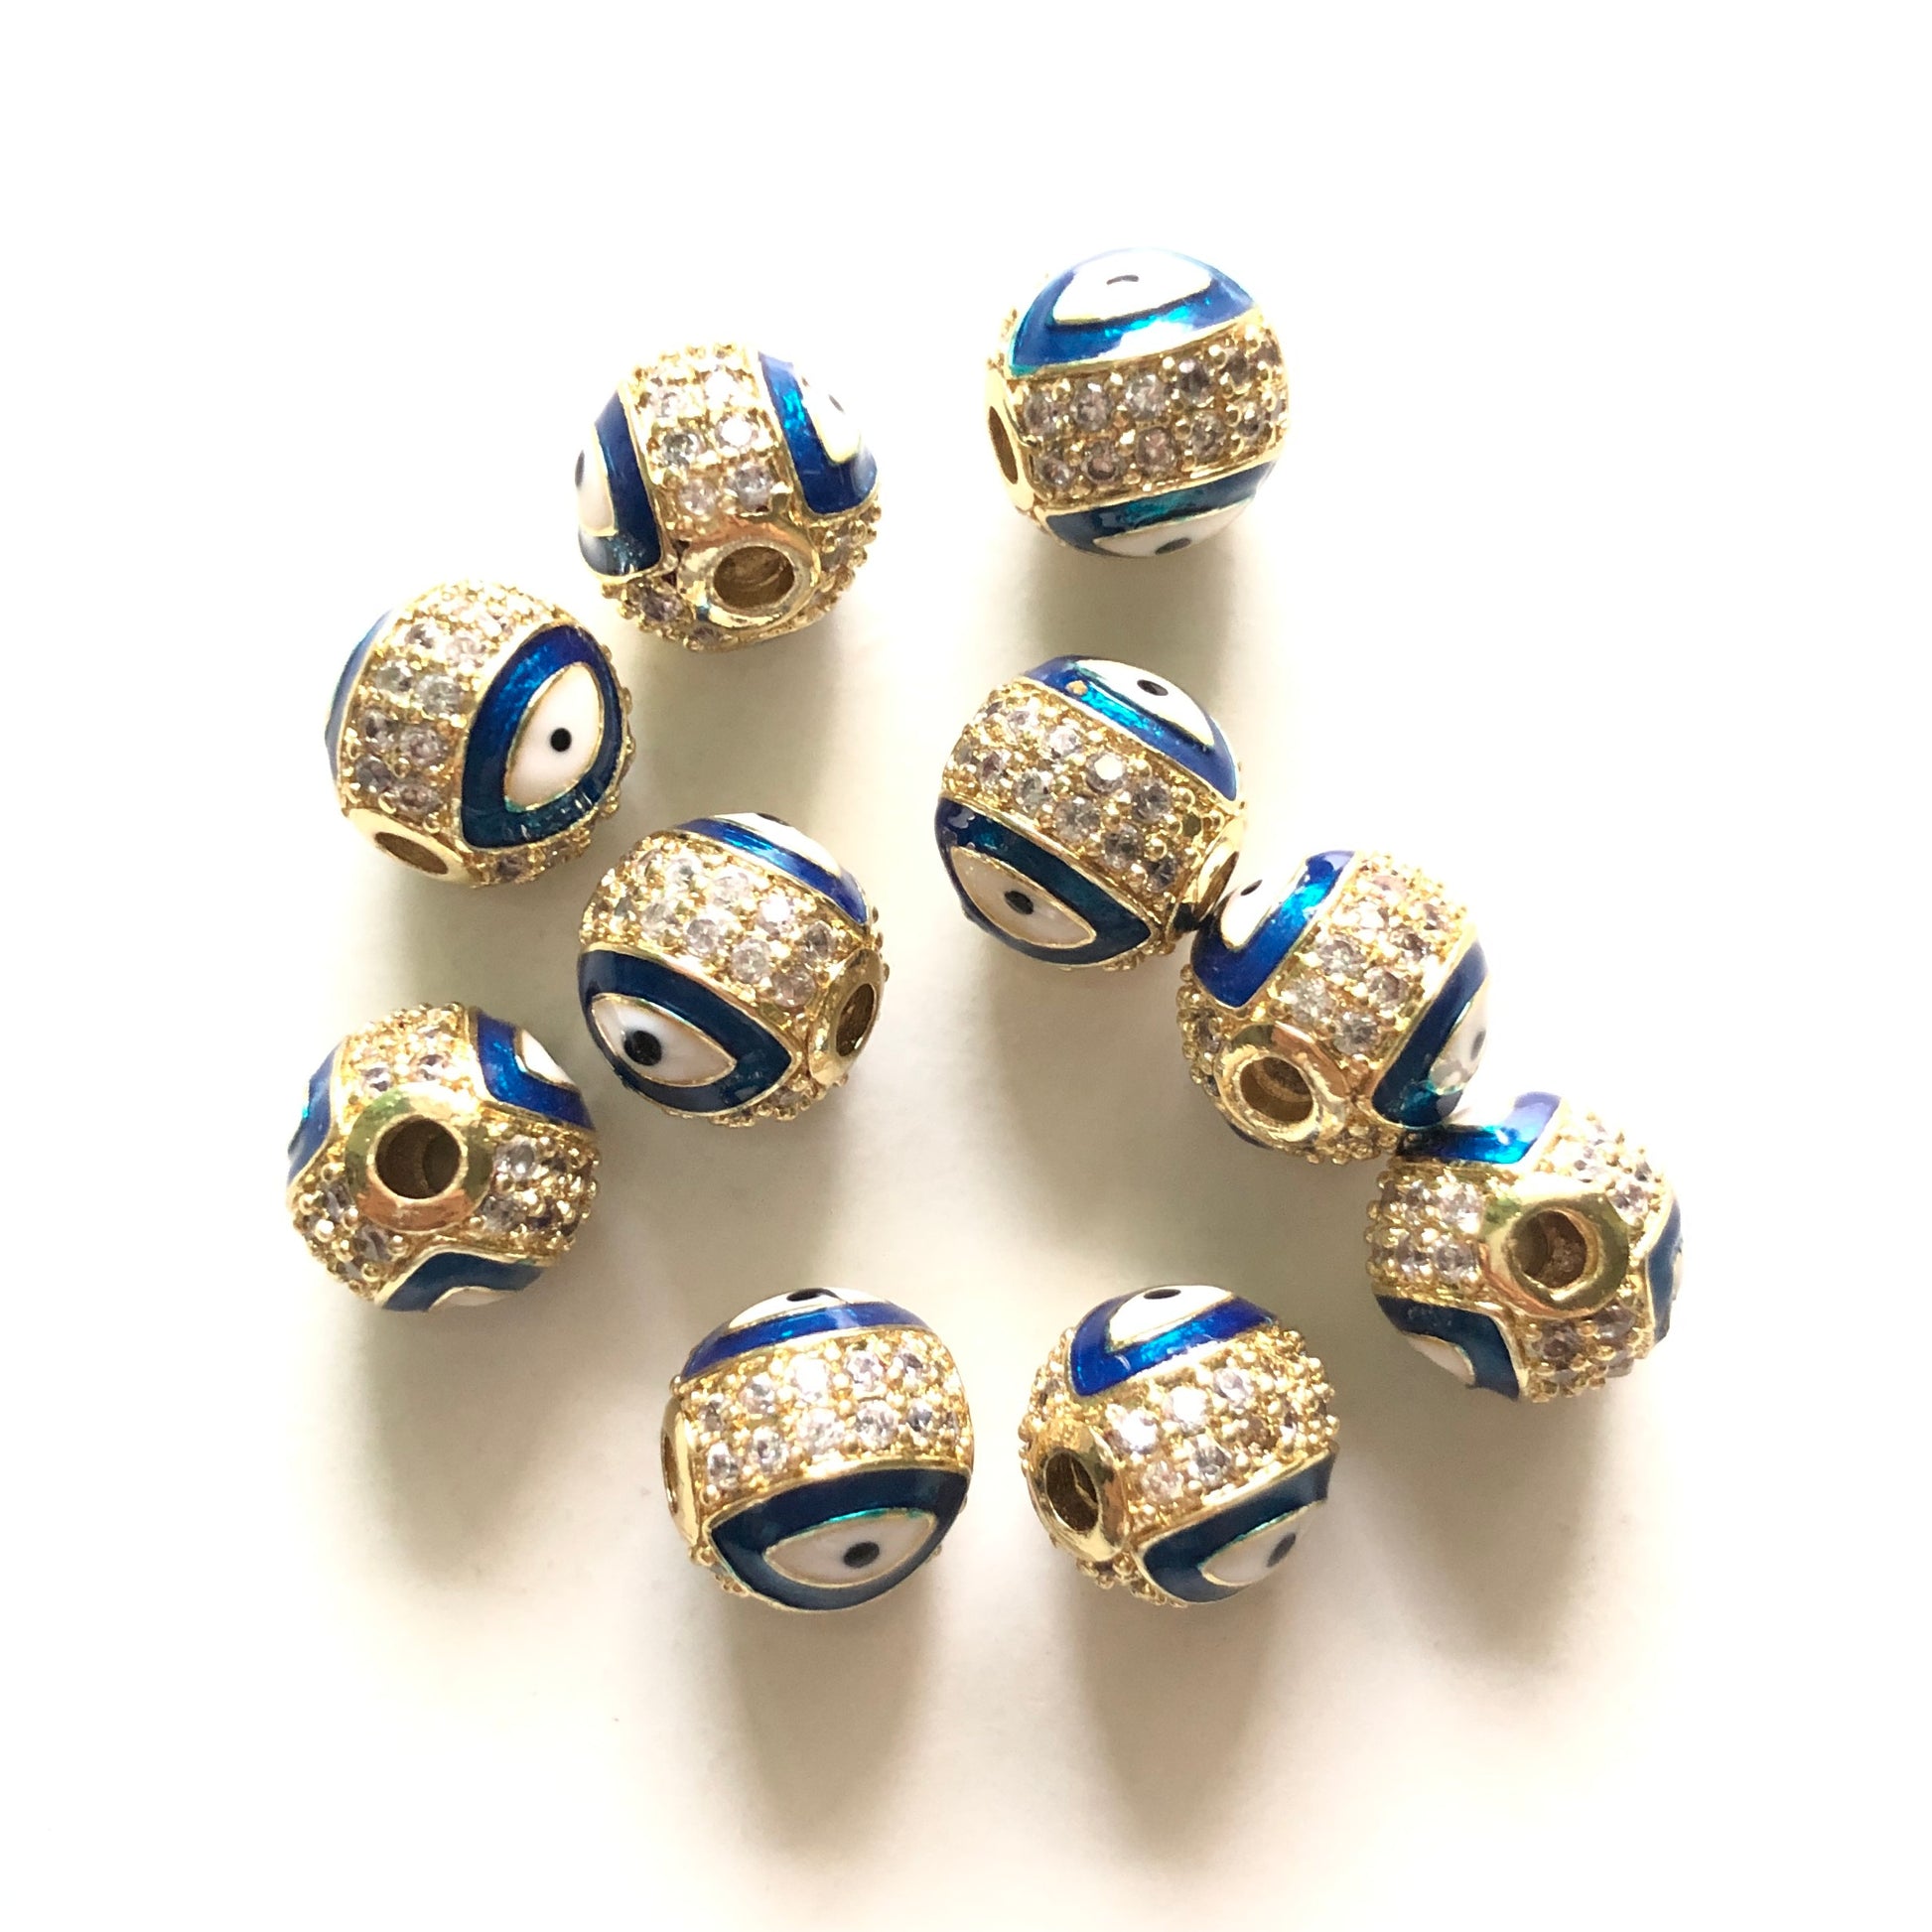 10pcs 10mm Enamel Blue Star Round Ball Spacers Beads for Women